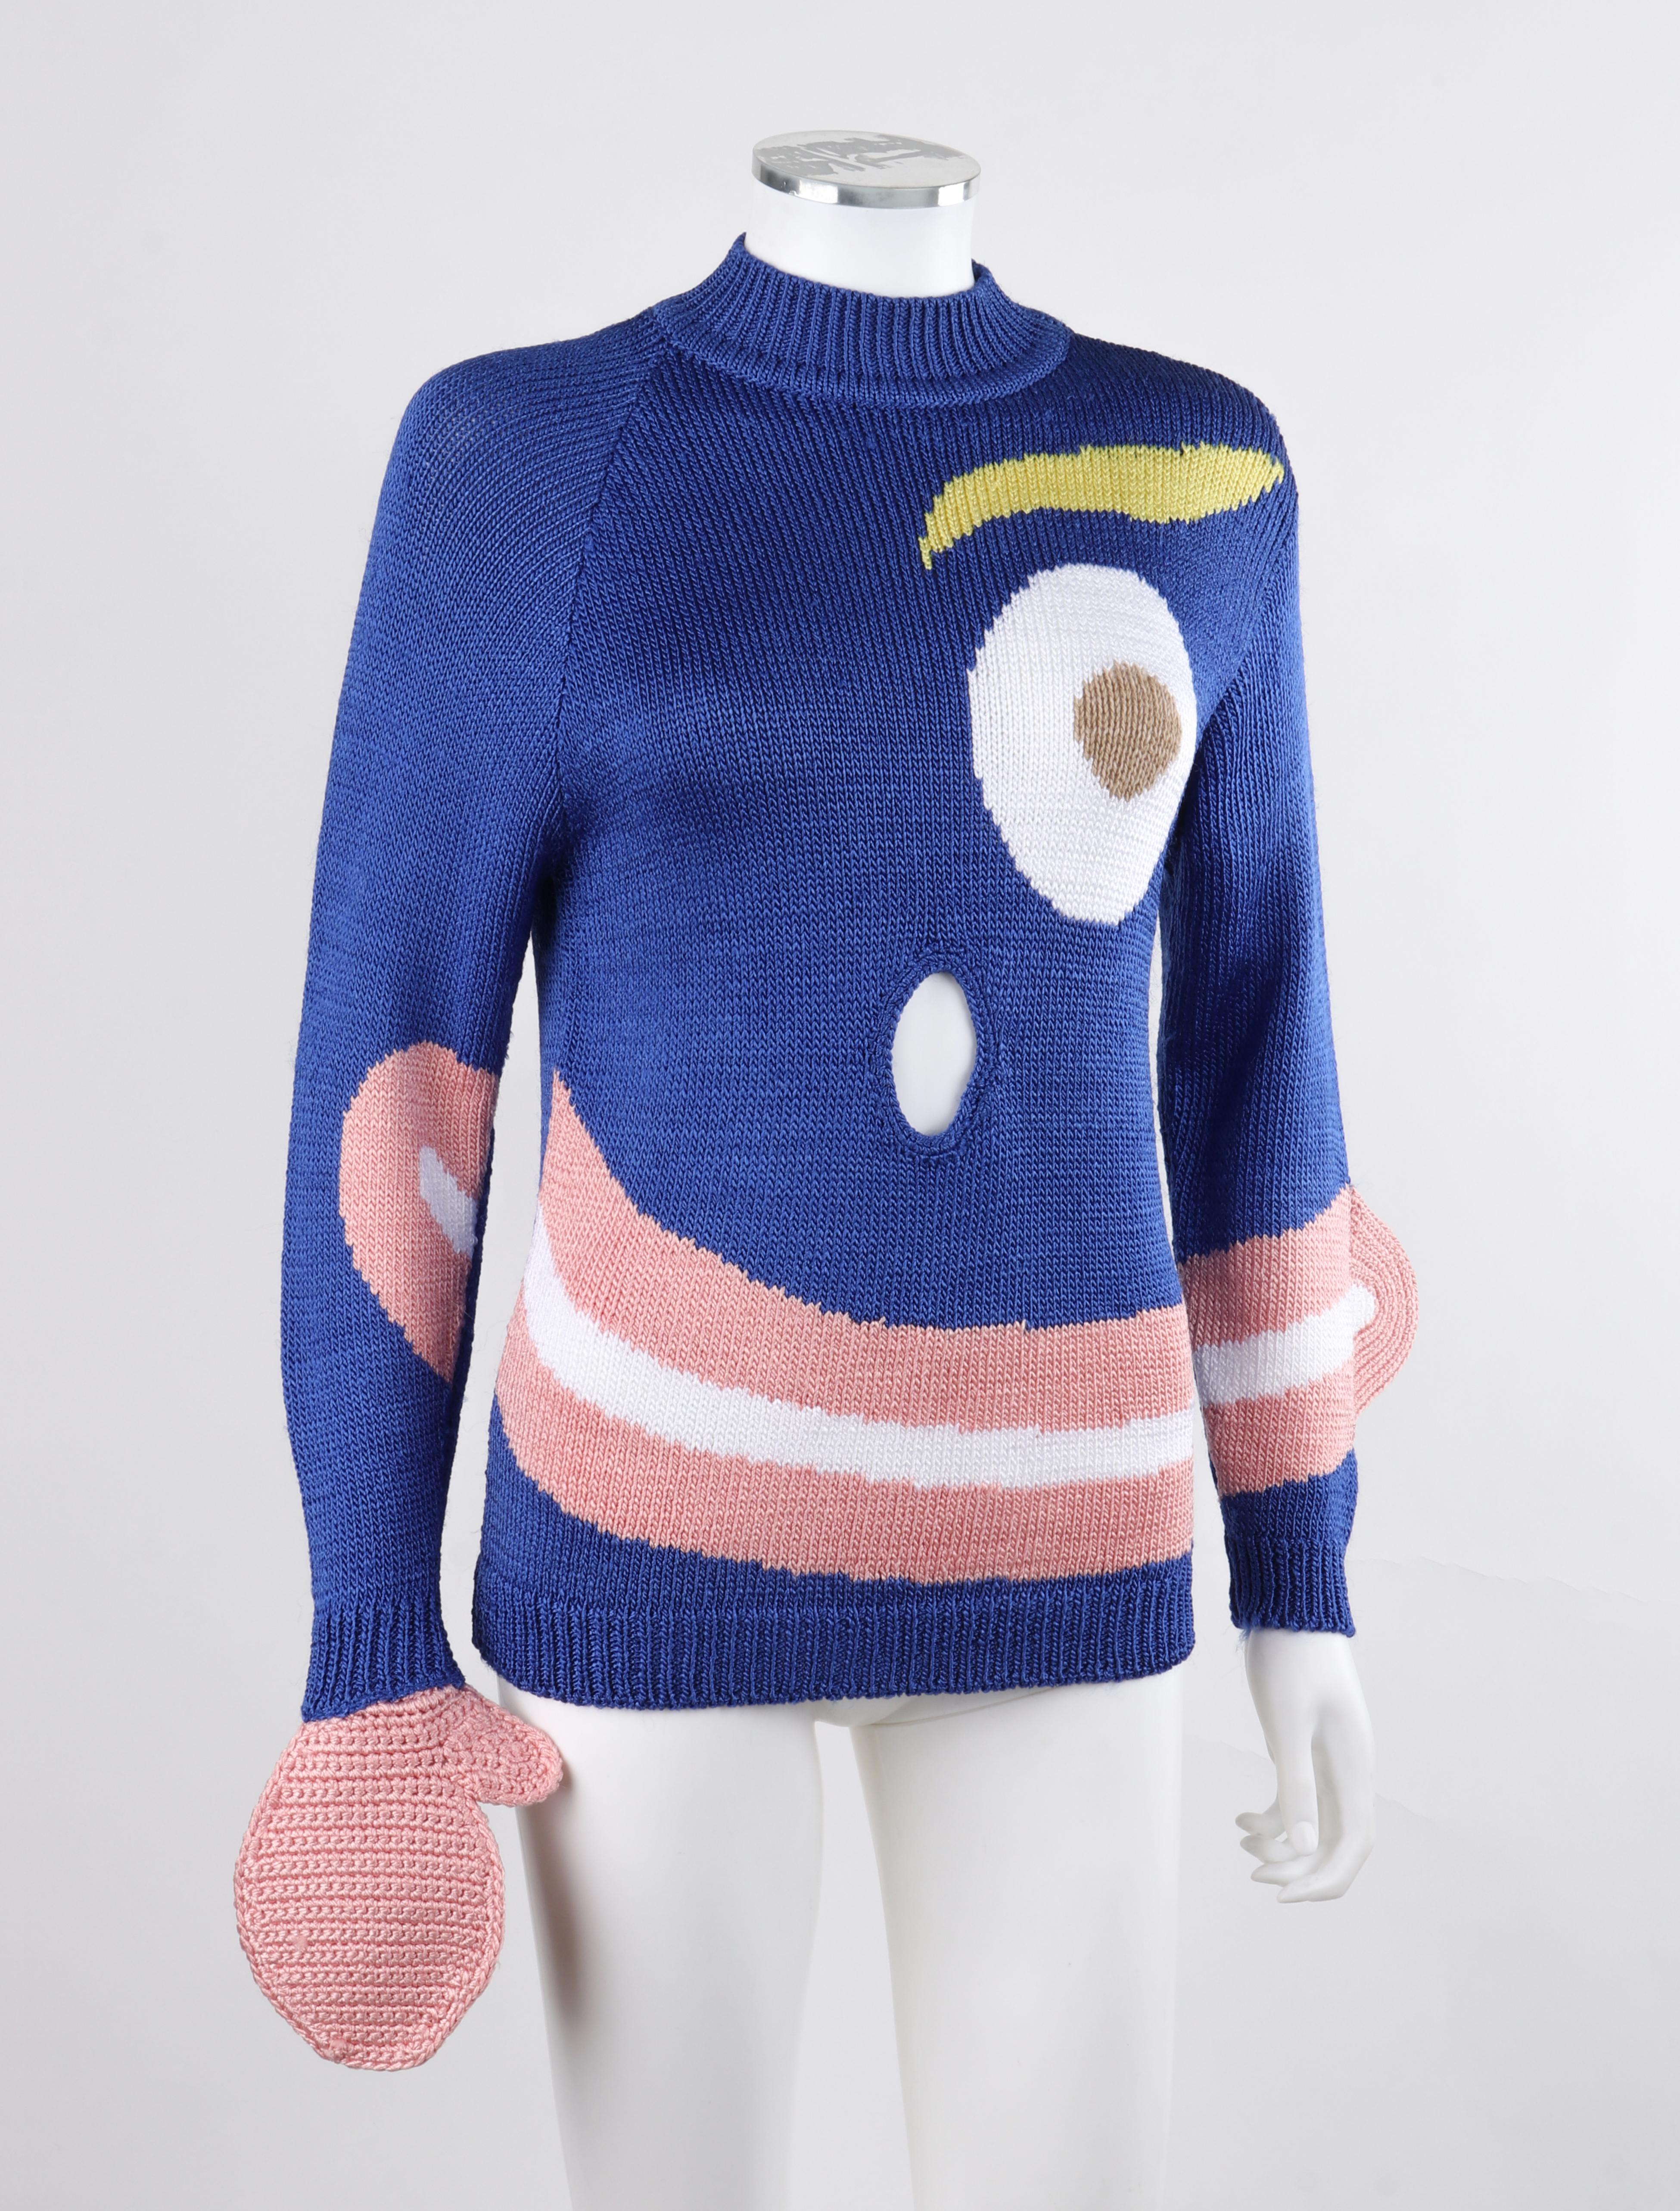 SURVIVAL OF THE FASHIONEST F/S 2020 Blauer Strick Pullover mit smiley Face Pullover Top S im Angebot 1